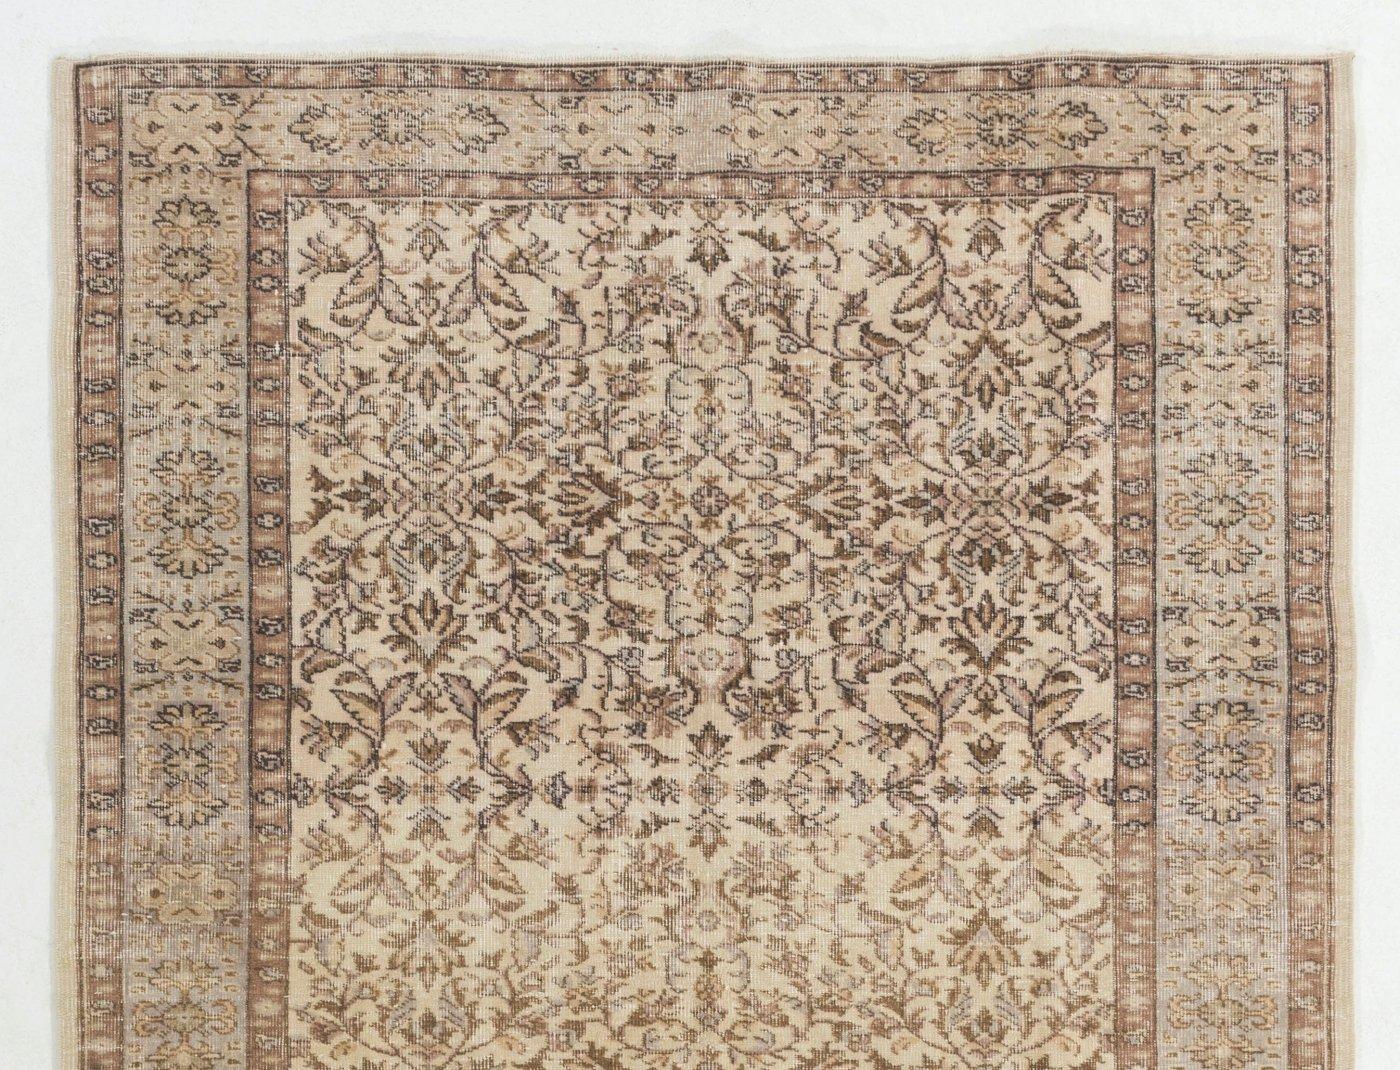 A vintage Turkish area rug in beige and brown colors. It was hand-knotted in the 1960s and all-over floral design. Low wool pile on finely woven cotton foundation. Sturdy and can be used on a high traffic area, suitable for both residential and